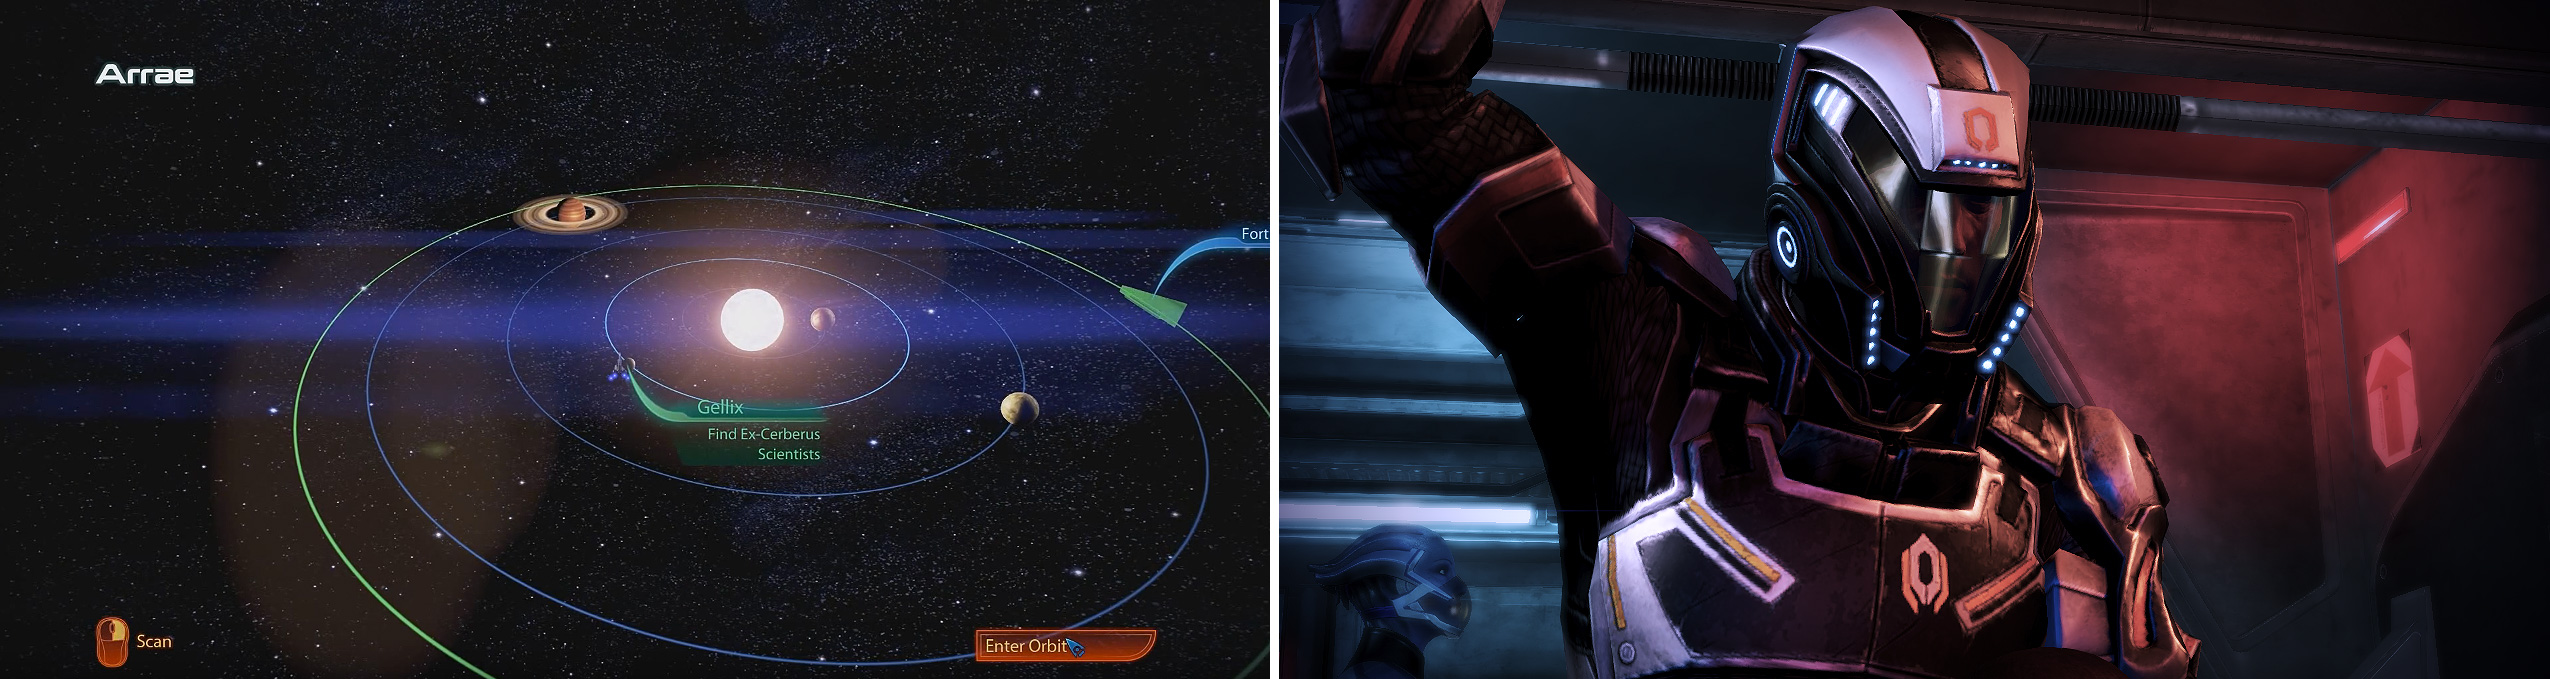 The planet Gellix (left) is where the mission takes place. The Cerberus suit (right) is a great purchase for snipers.